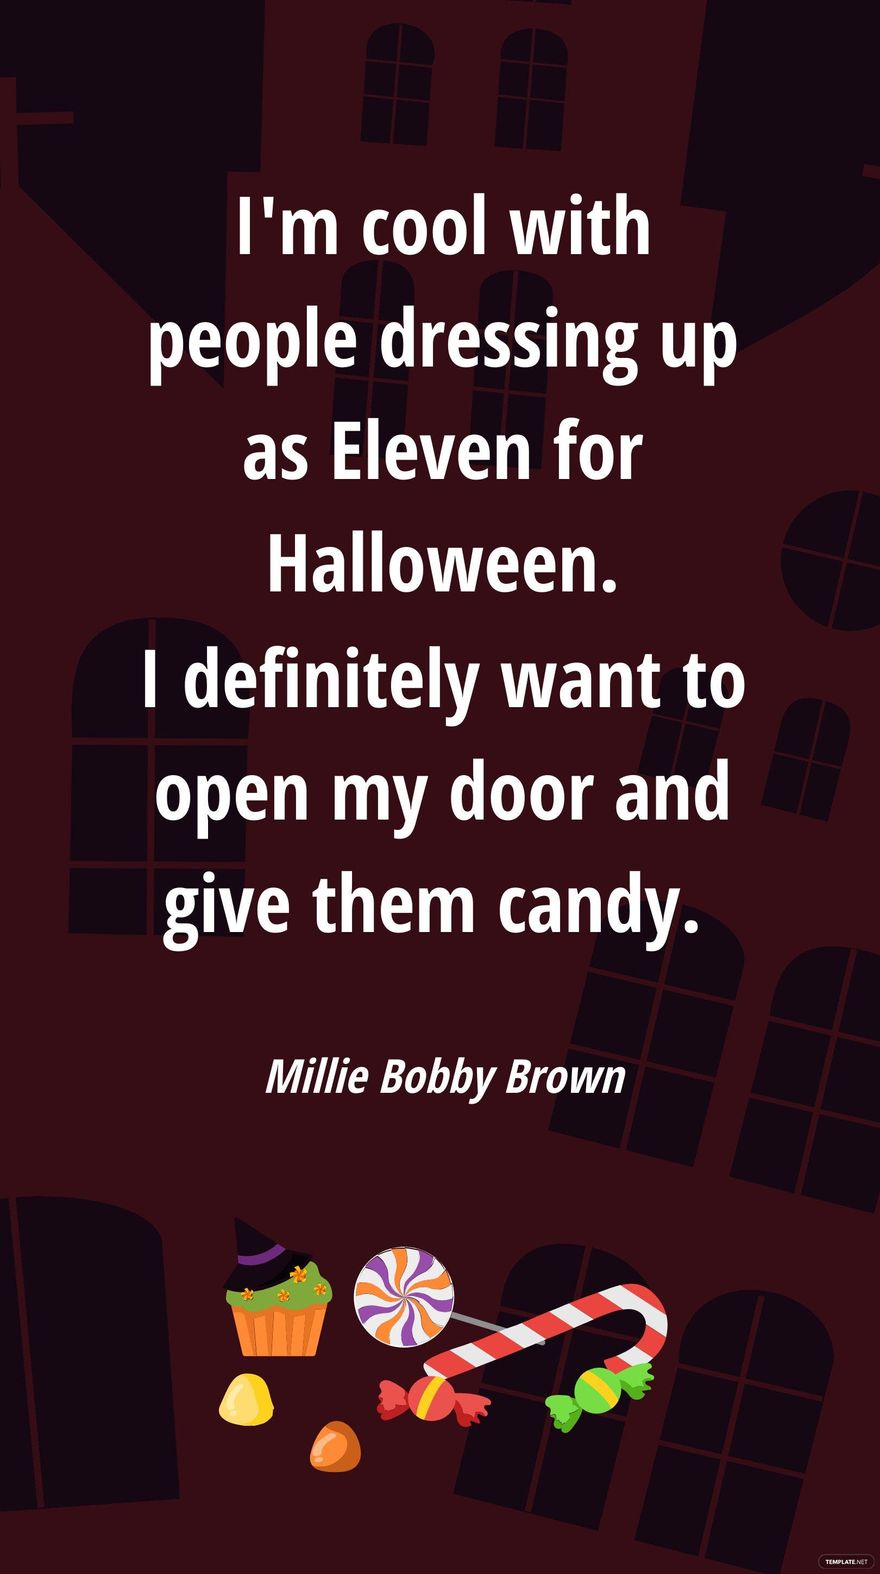 Free Millie Bobby Brown - I'm cool with people dressing up as Eleven for Halloween. I definitely want to open my door and give them candy.